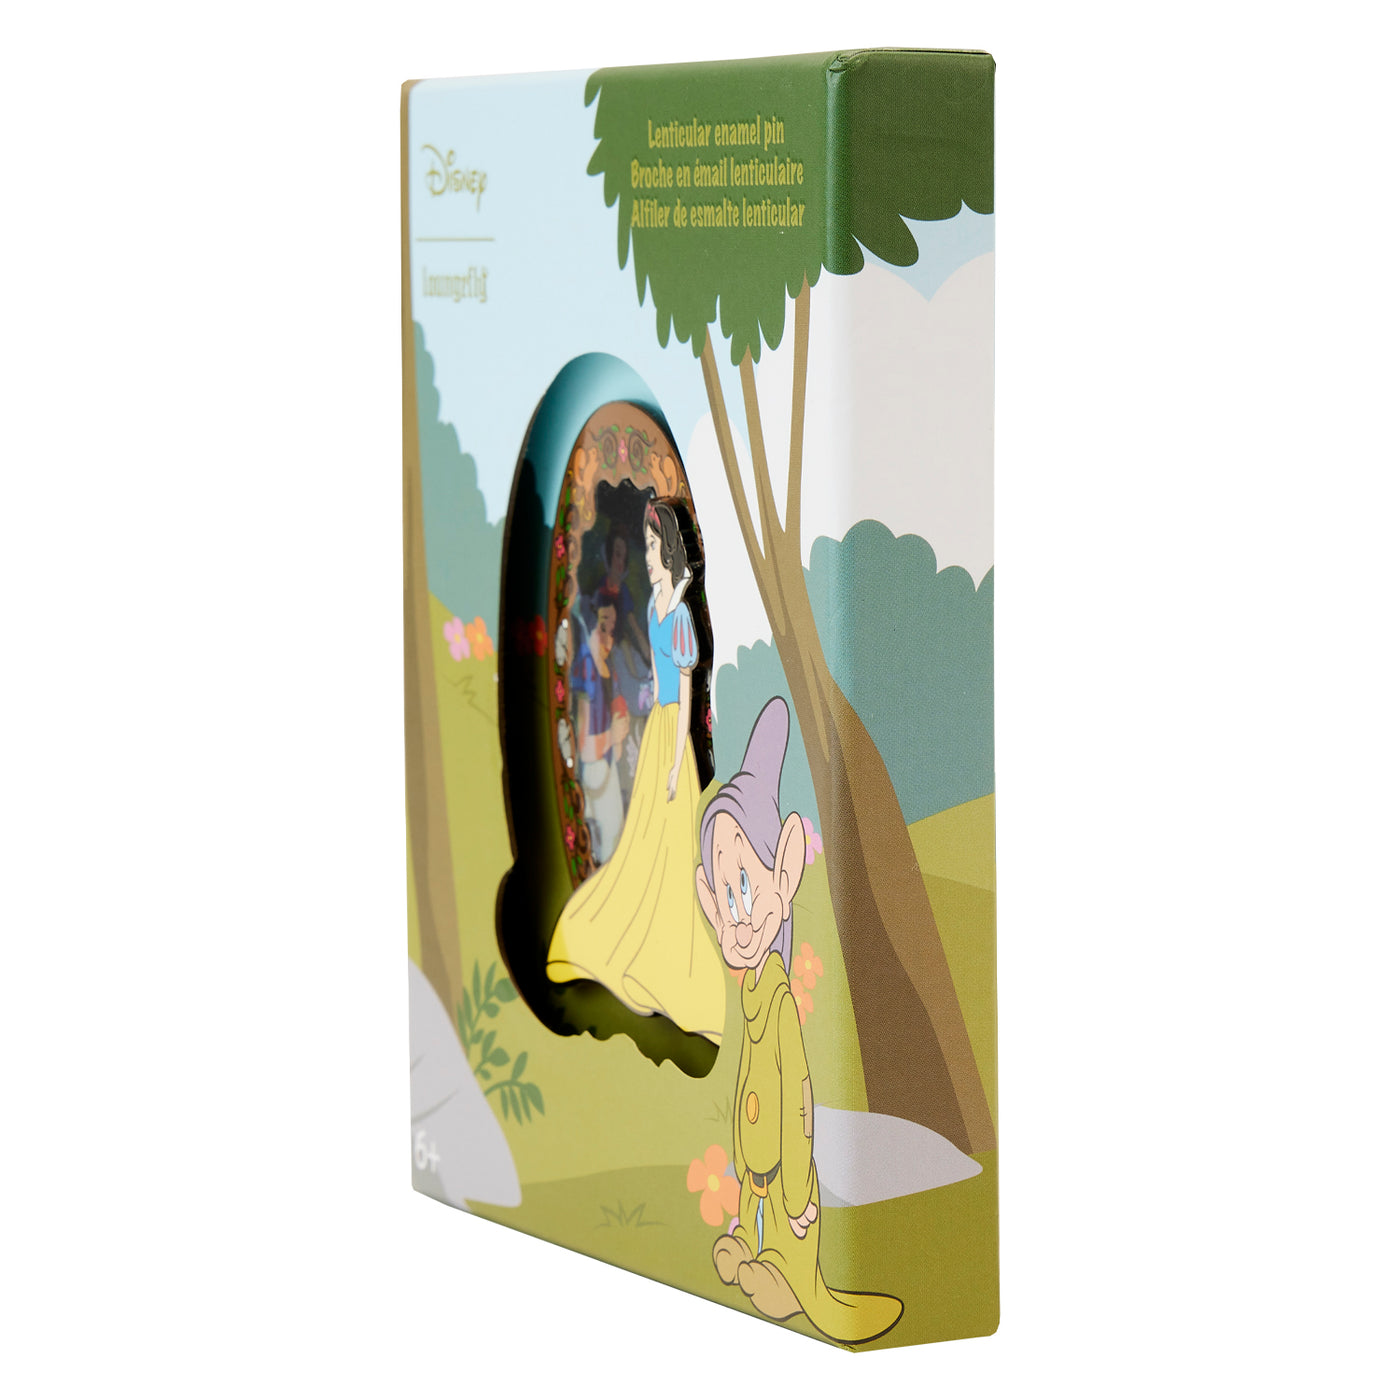 Disney Snow White Lenticular Princess Series 3" Collector's Box Pin Limited Edition